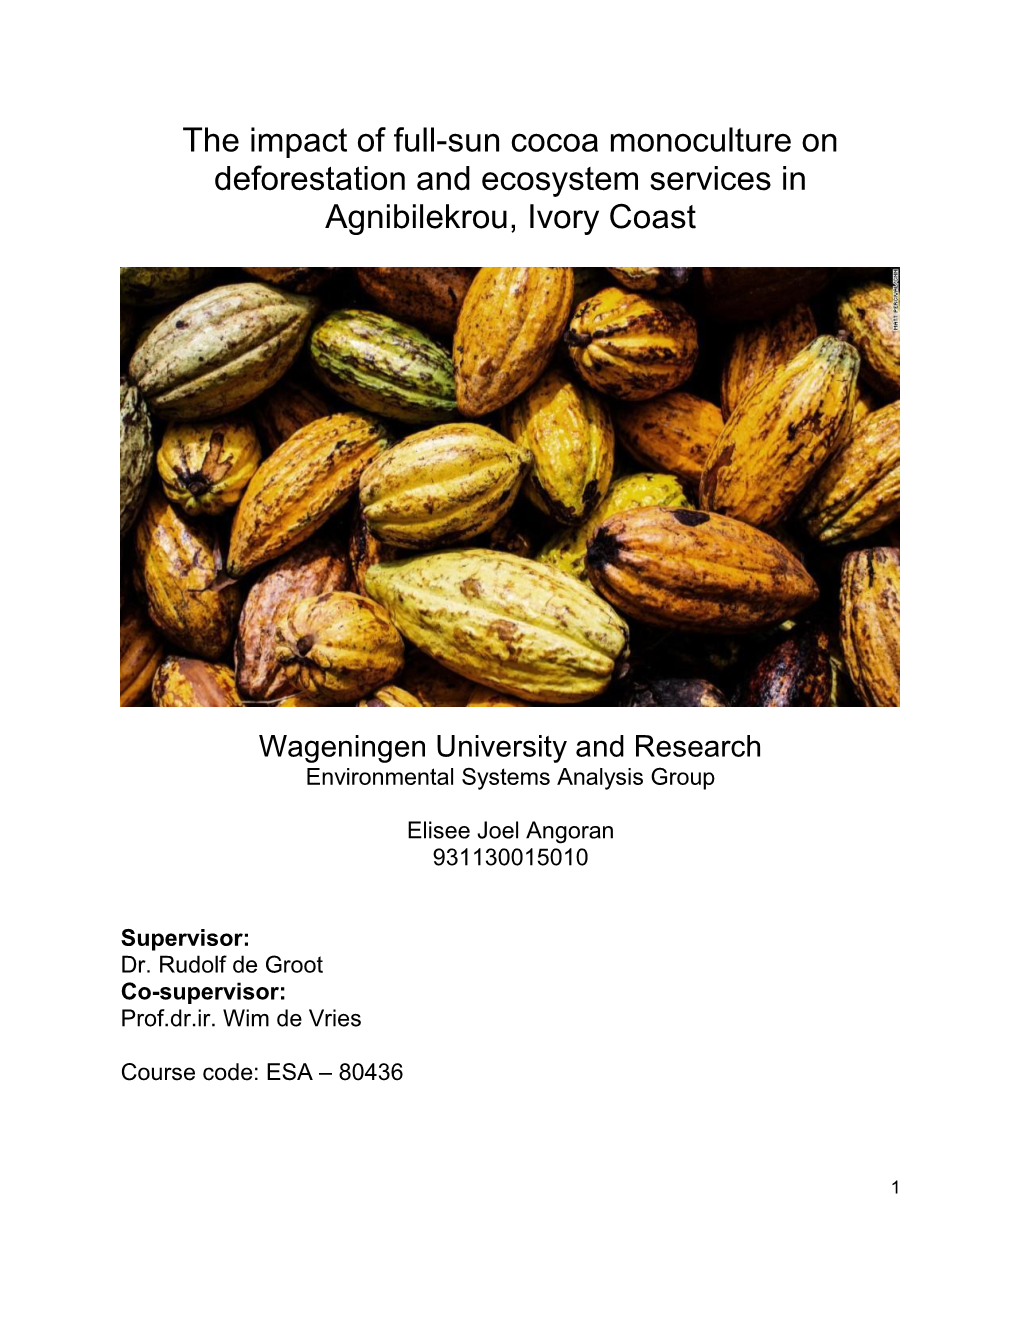 The Impact of Full-Sun Cocoa Monoculture on Deforestation and Ecosystem Services in Agnibilekrou, Ivory Coast